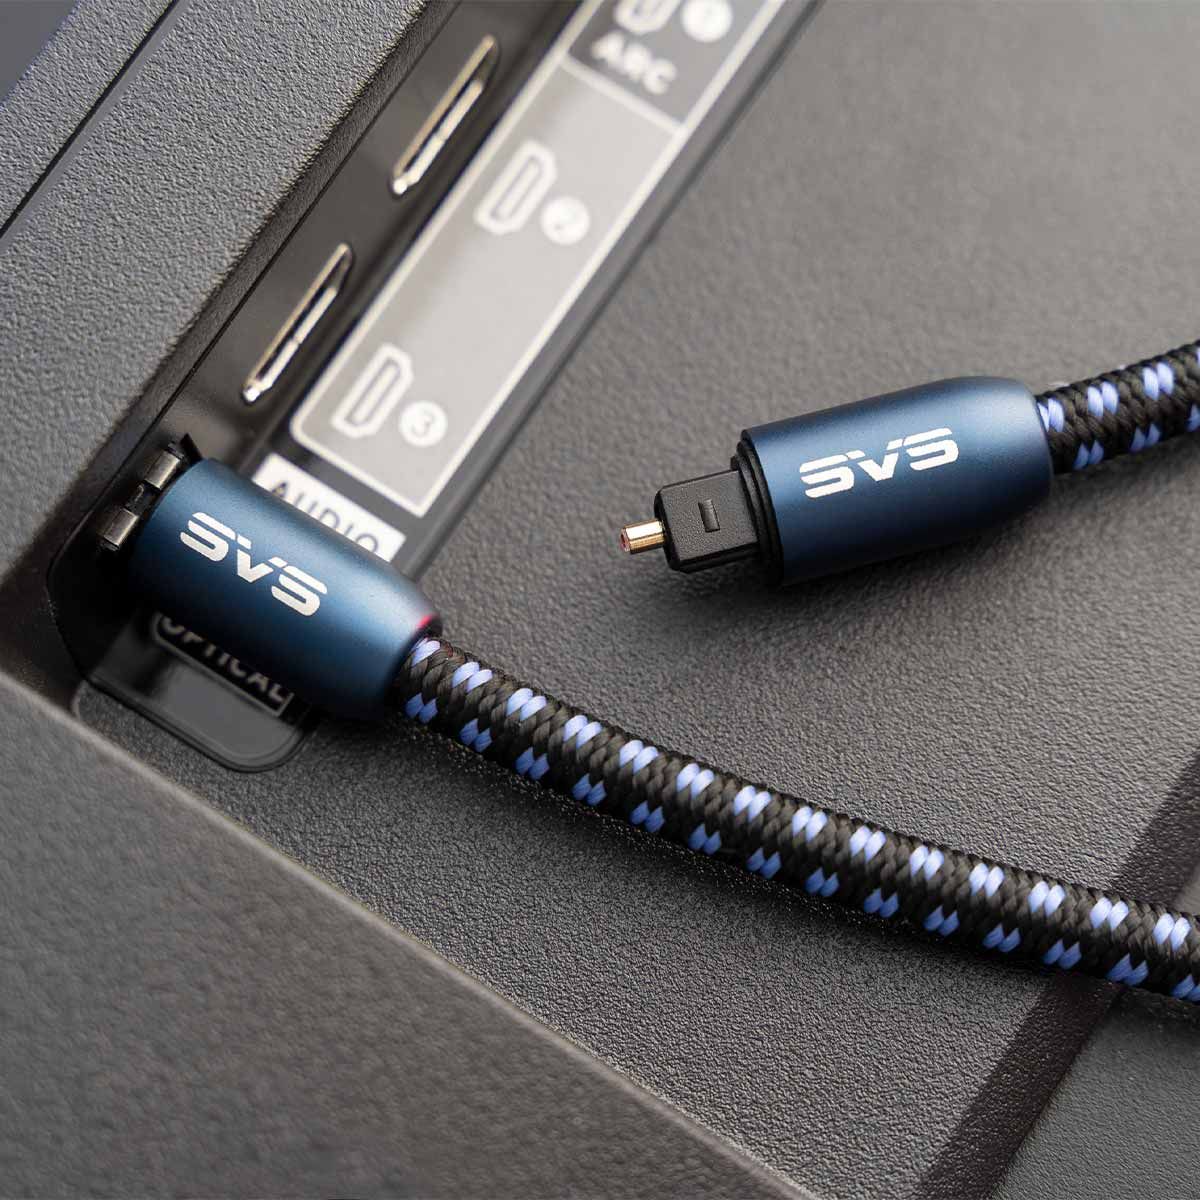 SVS SoundPath Digital Optical Cable - plugged into TV